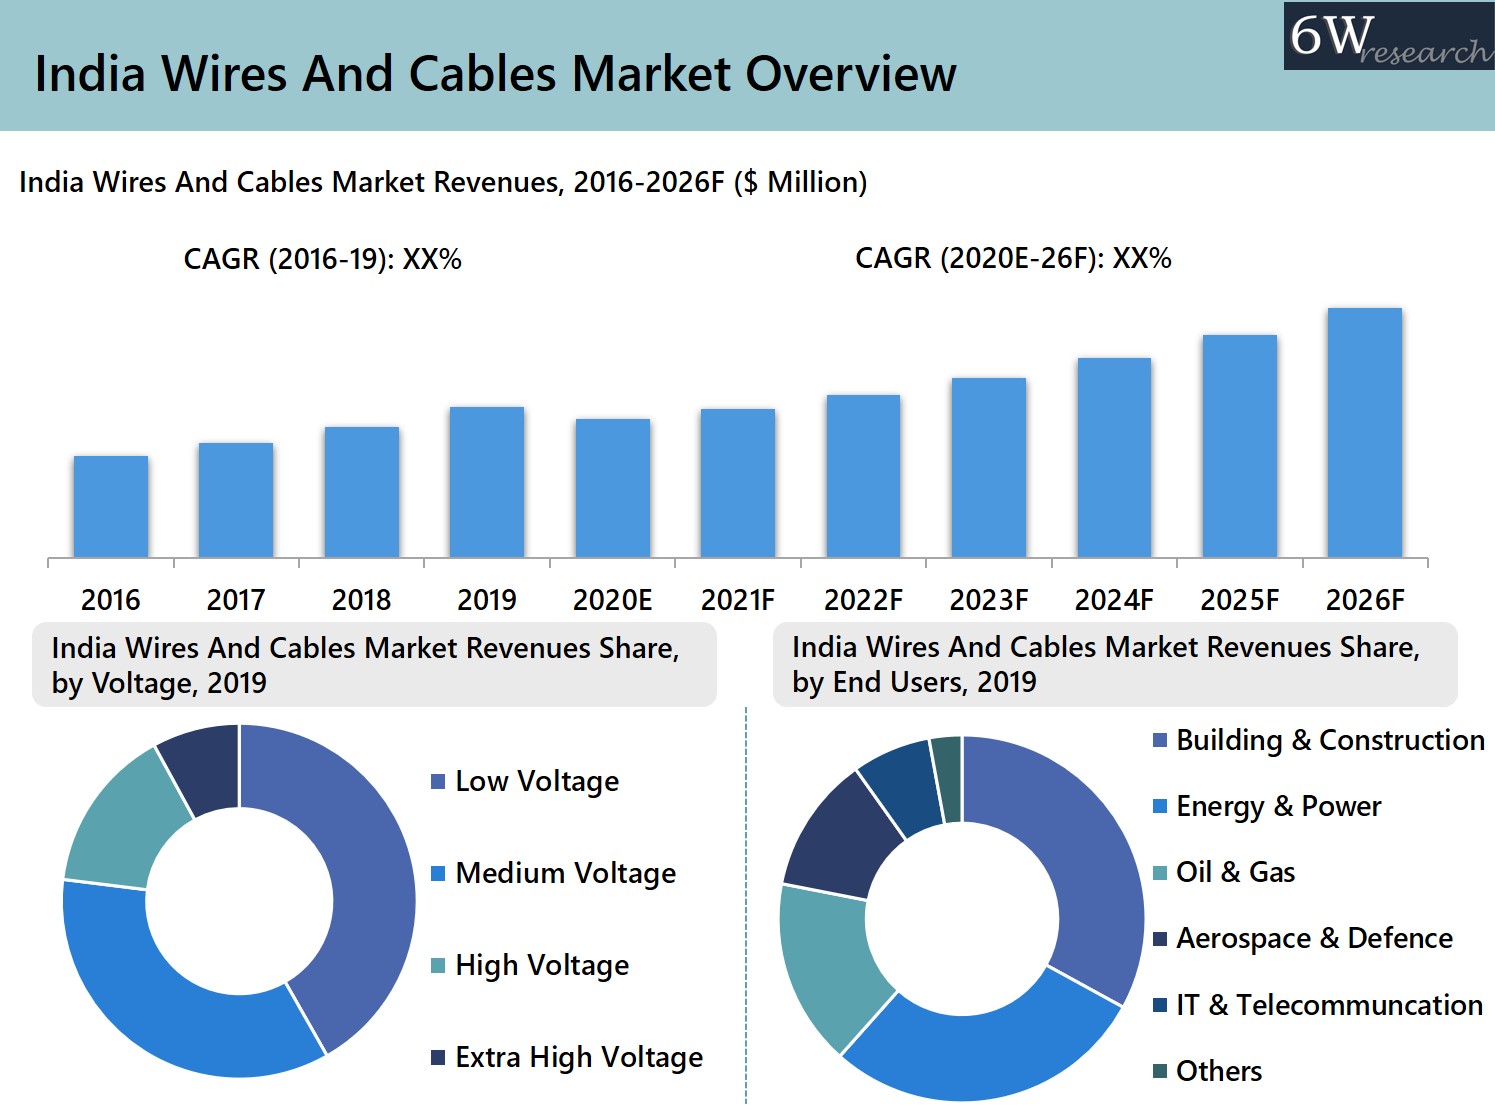 India Wires And Cables Market